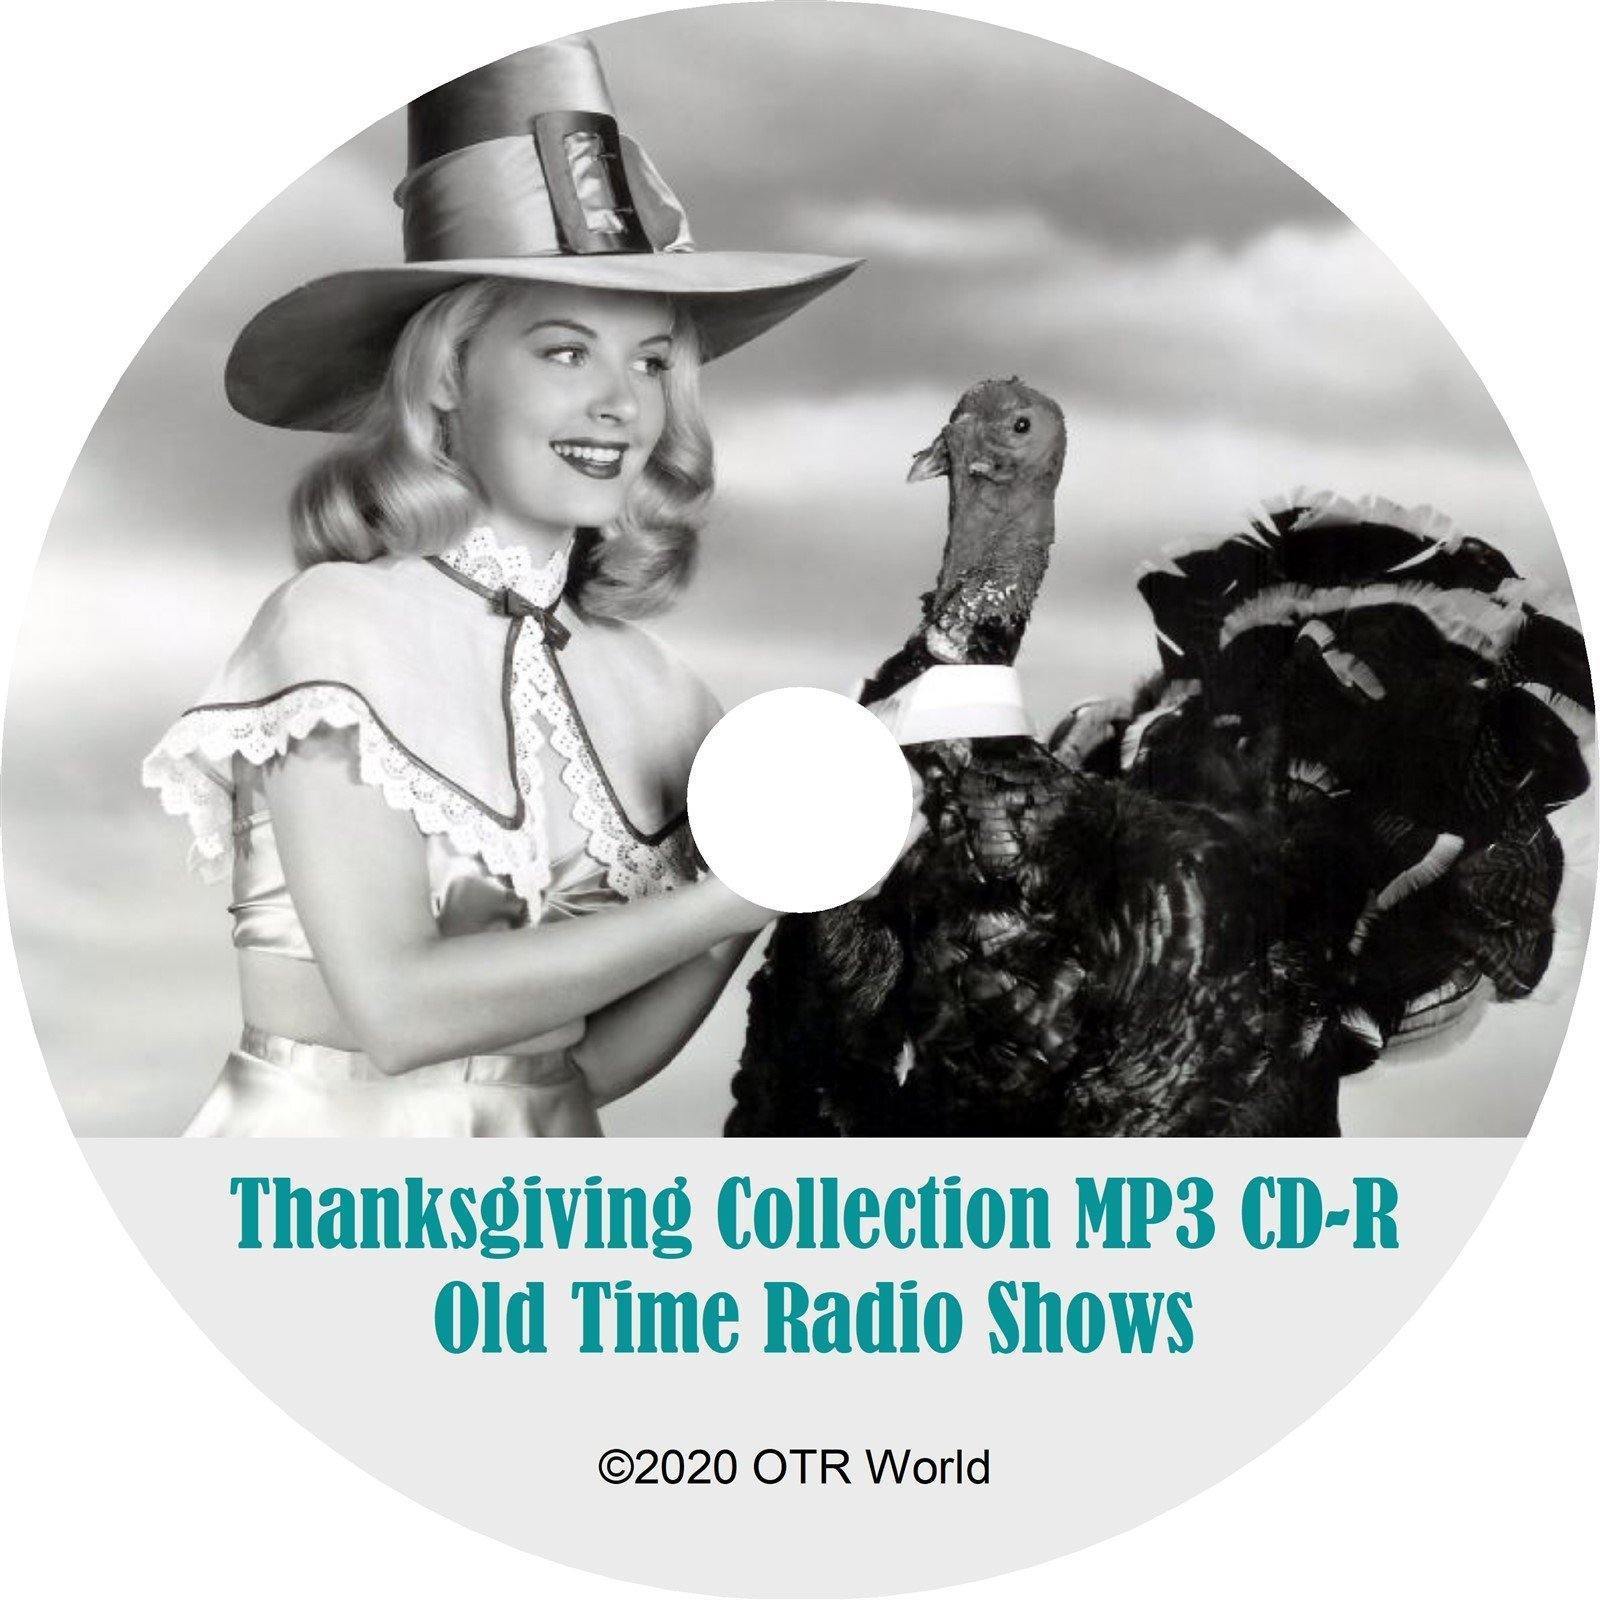 Thanksgiving OTR Old Time Radio Shows On MP3 CD-R 101 Episodes OTRS